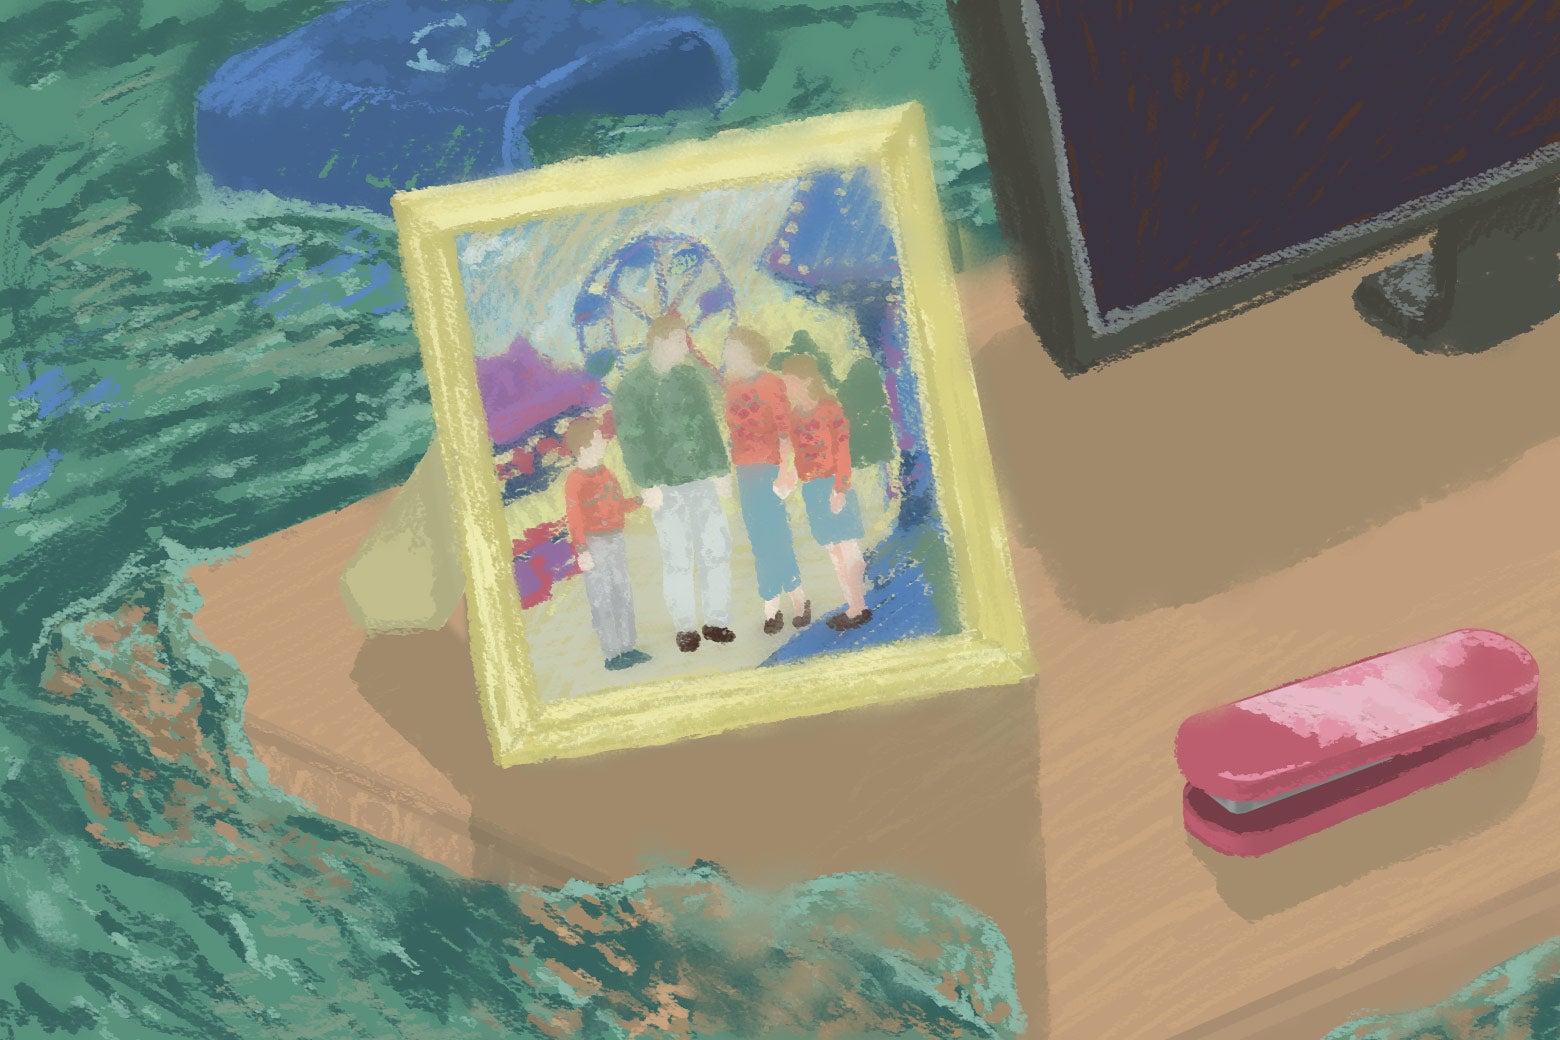 A dreamy illustration of the family amusement park photo referred to in the article as water rises around the table it is displayed on.